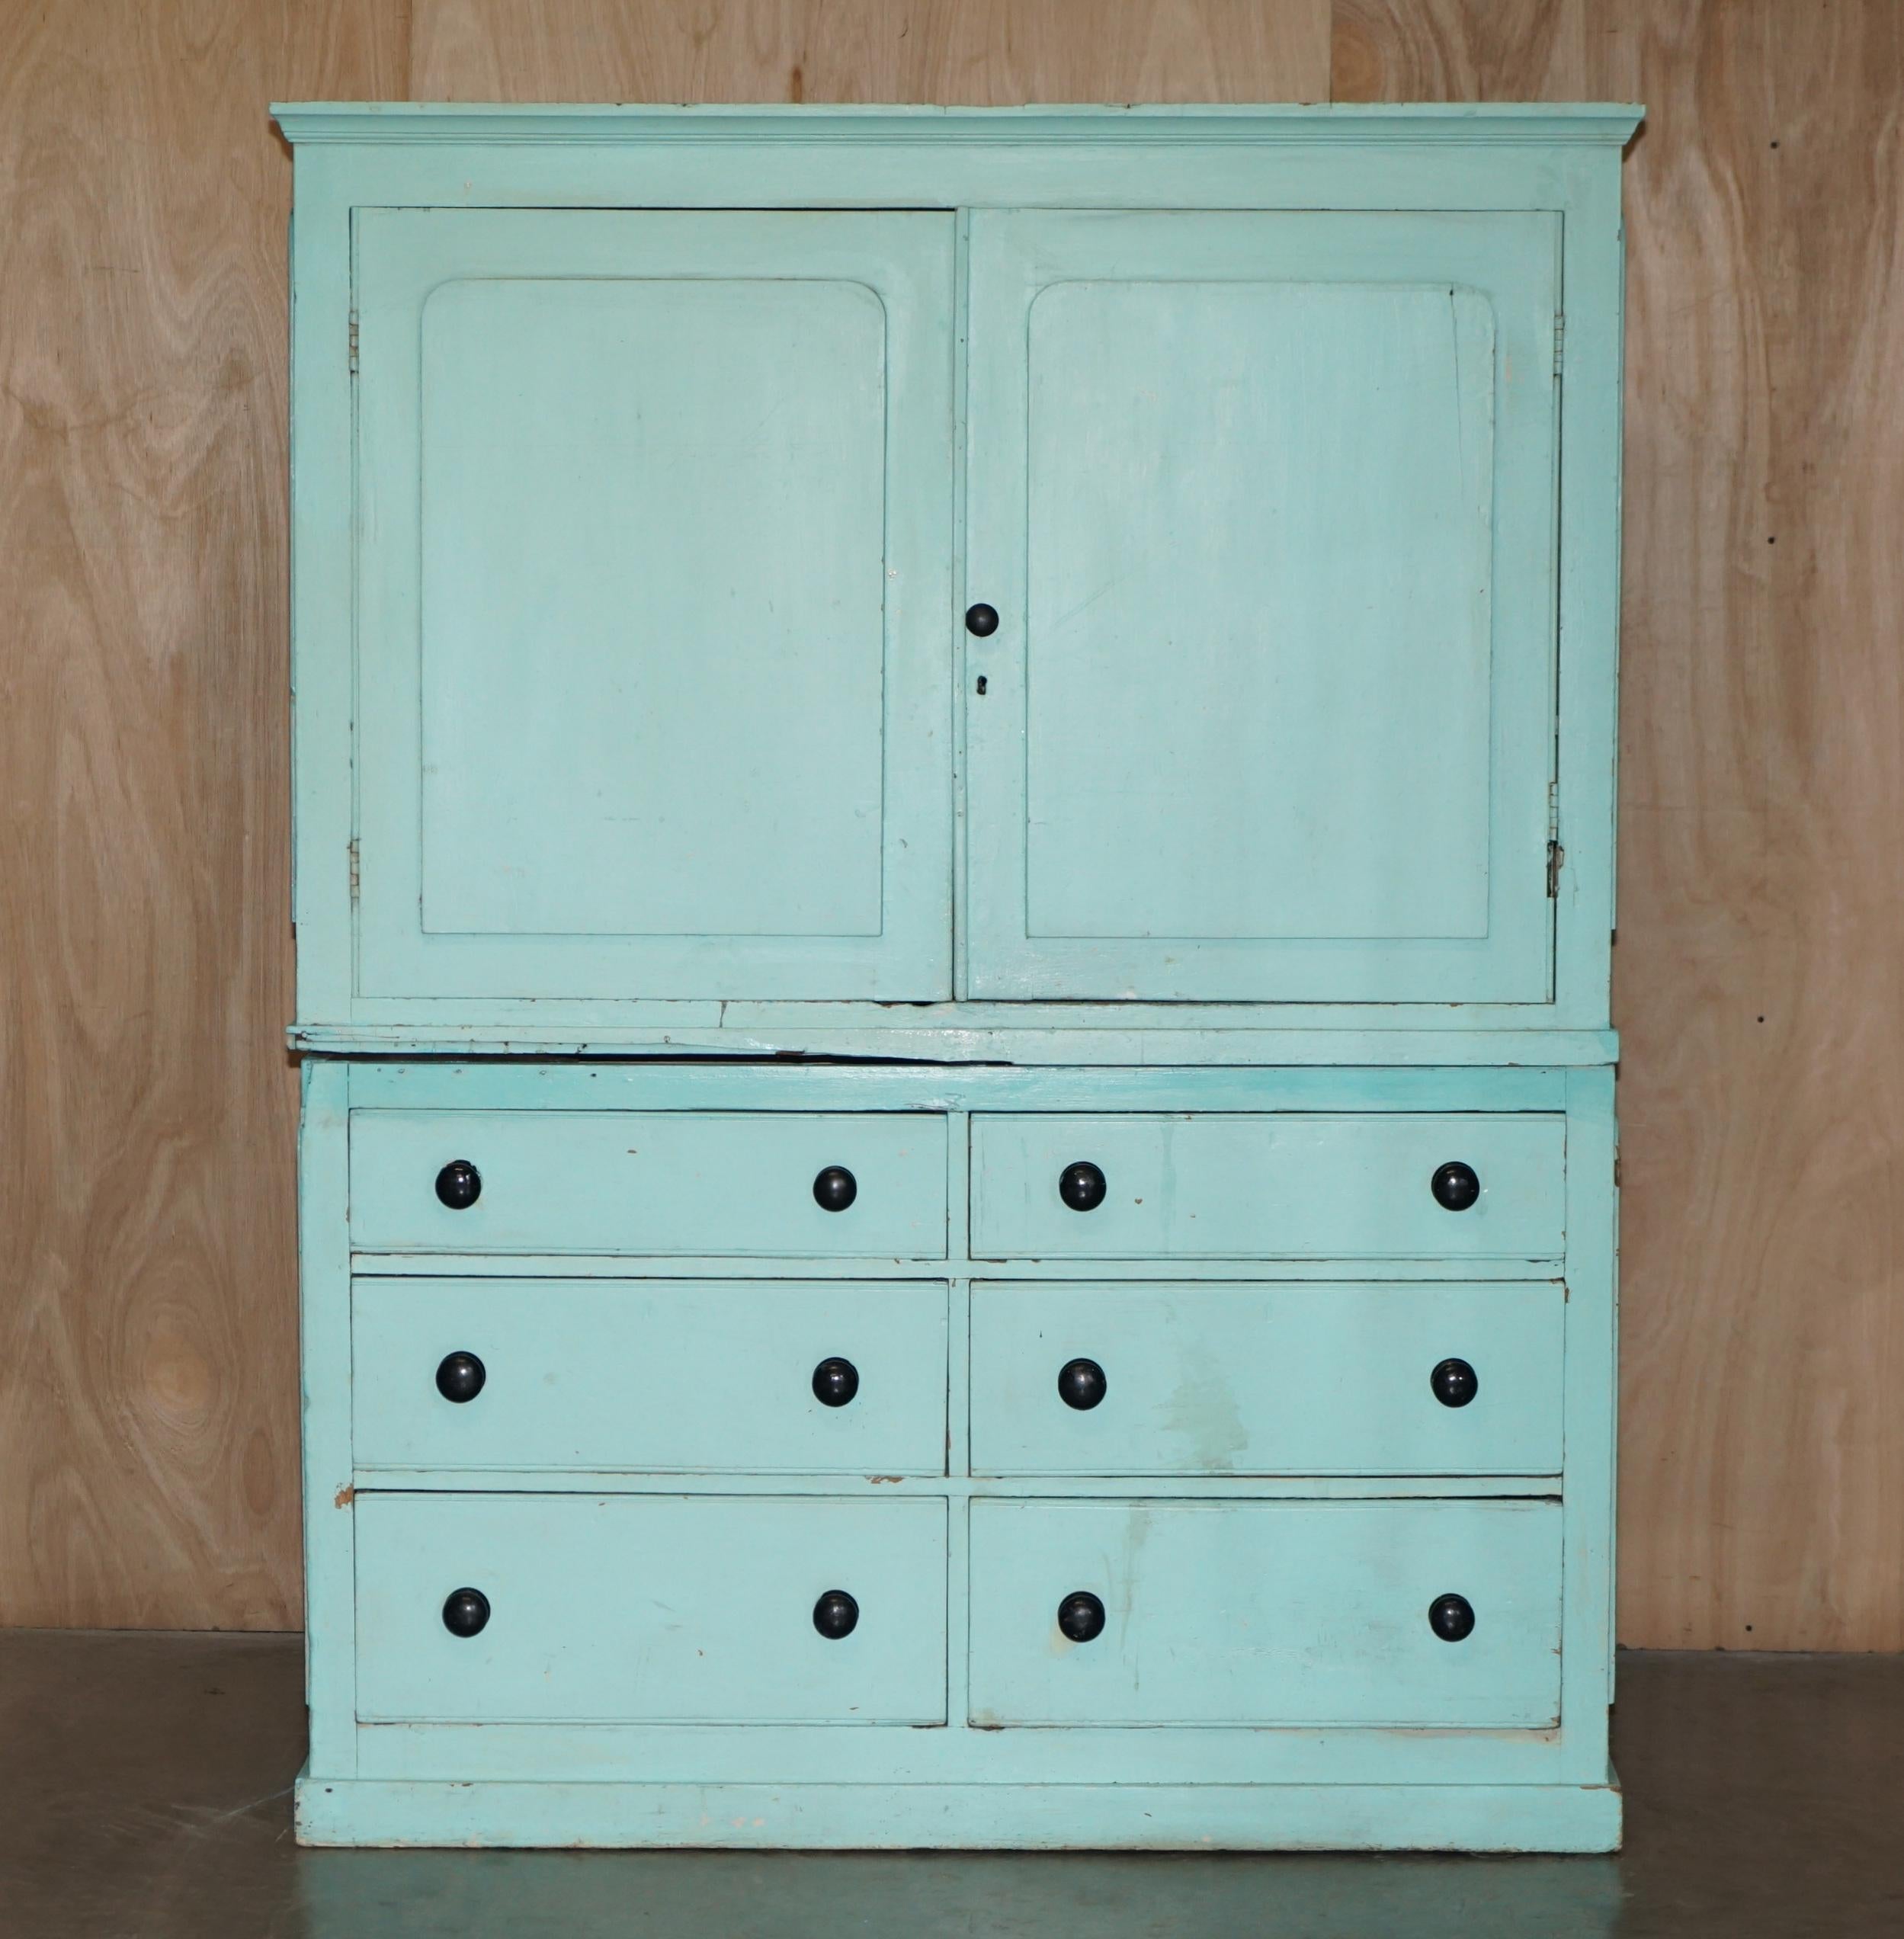 We are delighted to offer for sale this stunning highly collectable original paint Victorian pine Housekeepers linen or pot cupboard

A very charming and highly collectable piece, the painting is beautifully aged and looks sublime in any setting,